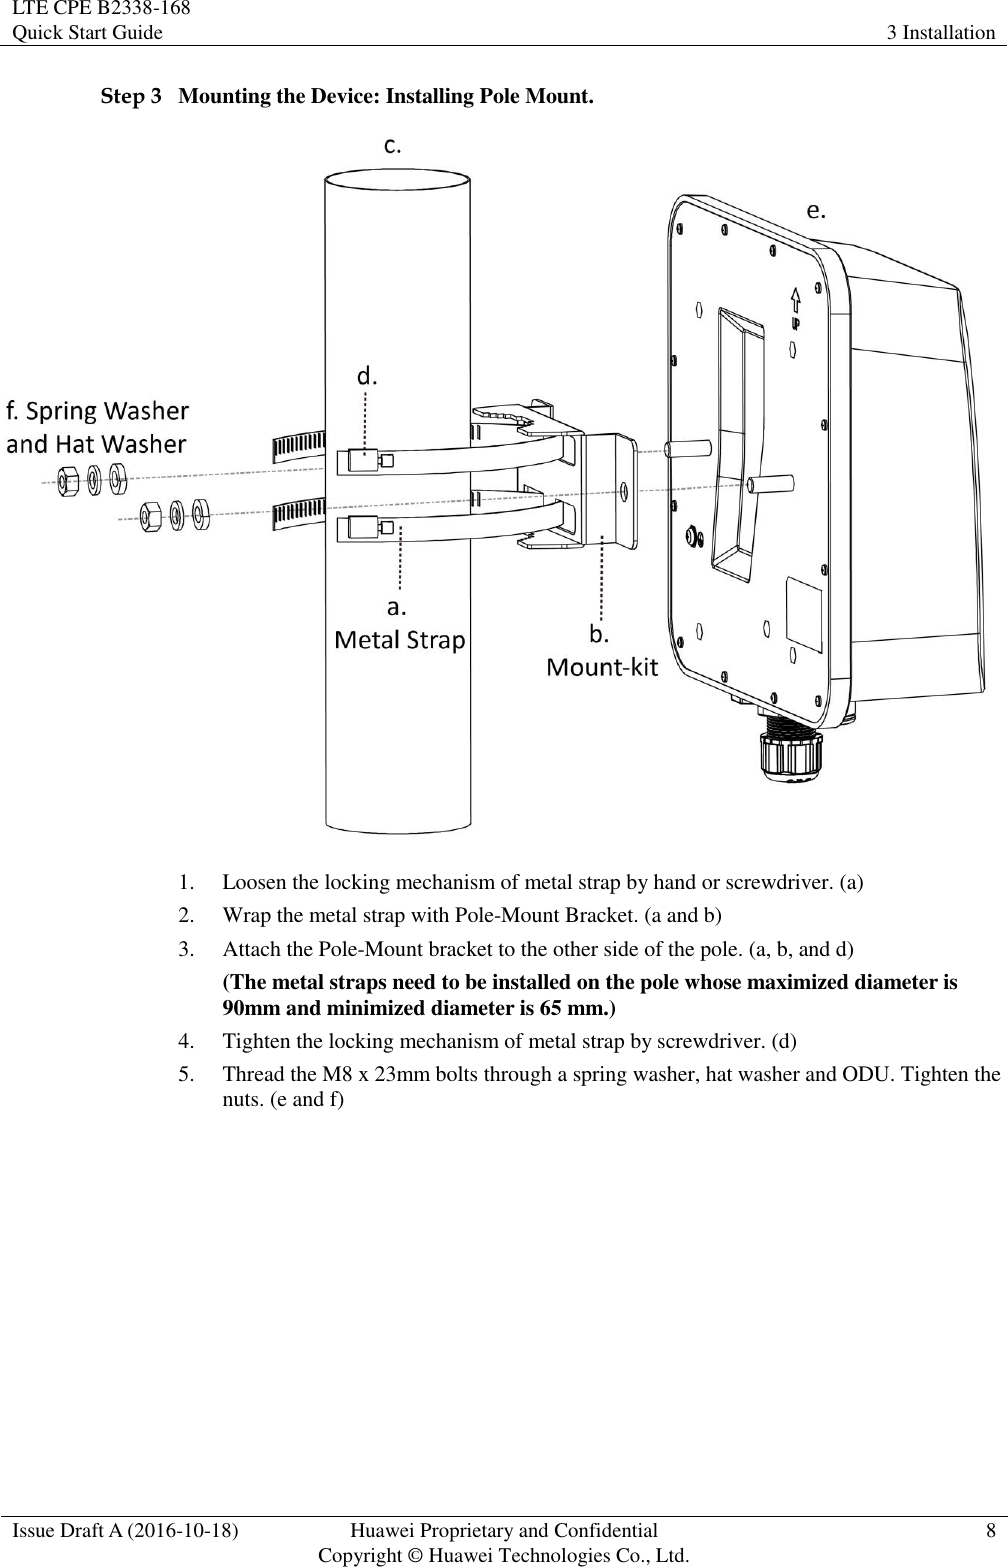 LTE CPE B2338-168   Quick Start Guide 3 Installation  Issue Draft A (2016-10-18) Huawei Proprietary and Confidential                                     Copyright ©  Huawei Technologies Co., Ltd. 8  Step 3 Mounting the Device: Installing Pole Mount.  1. Loosen the locking mechanism of metal strap by hand or screwdriver. (a) 2. Wrap the metal strap with Pole-Mount Bracket. (a and b) 3. Attach the Pole-Mount bracket to the other side of the pole. (a, b, and d) (The metal straps need to be installed on the pole whose maximized diameter is 90mm and minimized diameter is 65 mm.)   4. Tighten the locking mechanism of metal strap by screwdriver. (d) 5. Thread the M8 x 23mm bolts through a spring washer, hat washer and ODU. Tighten the nuts. (e and f) 